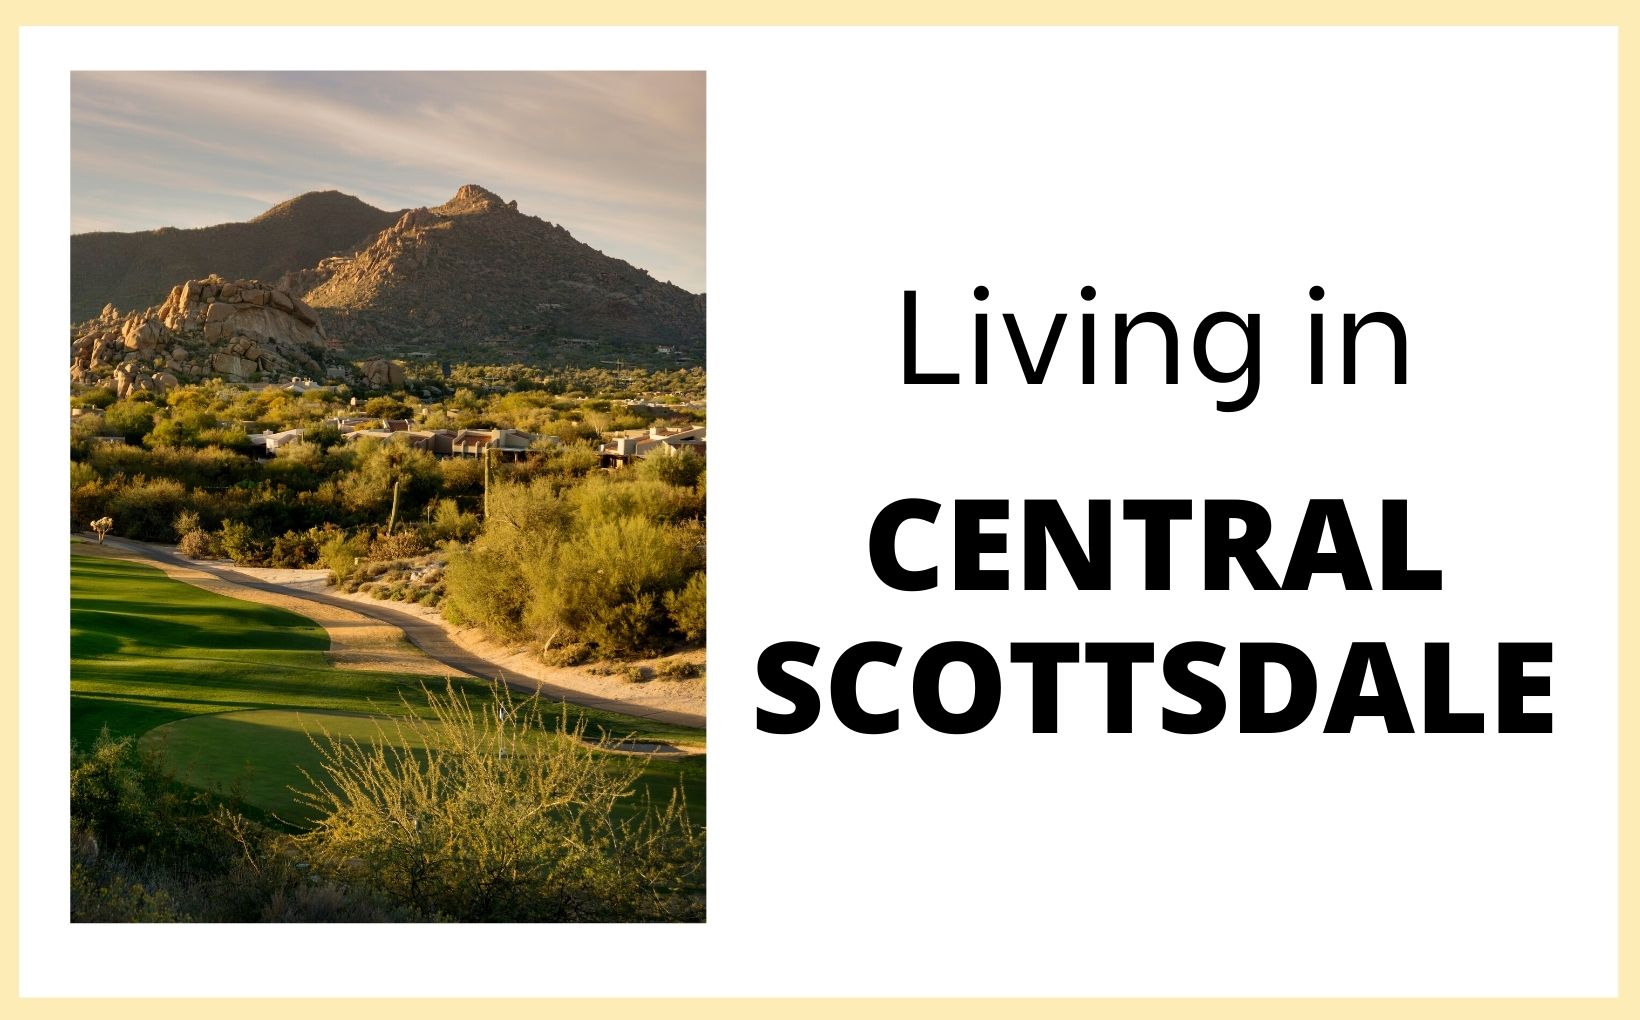 Living Central Scottsdale feature image